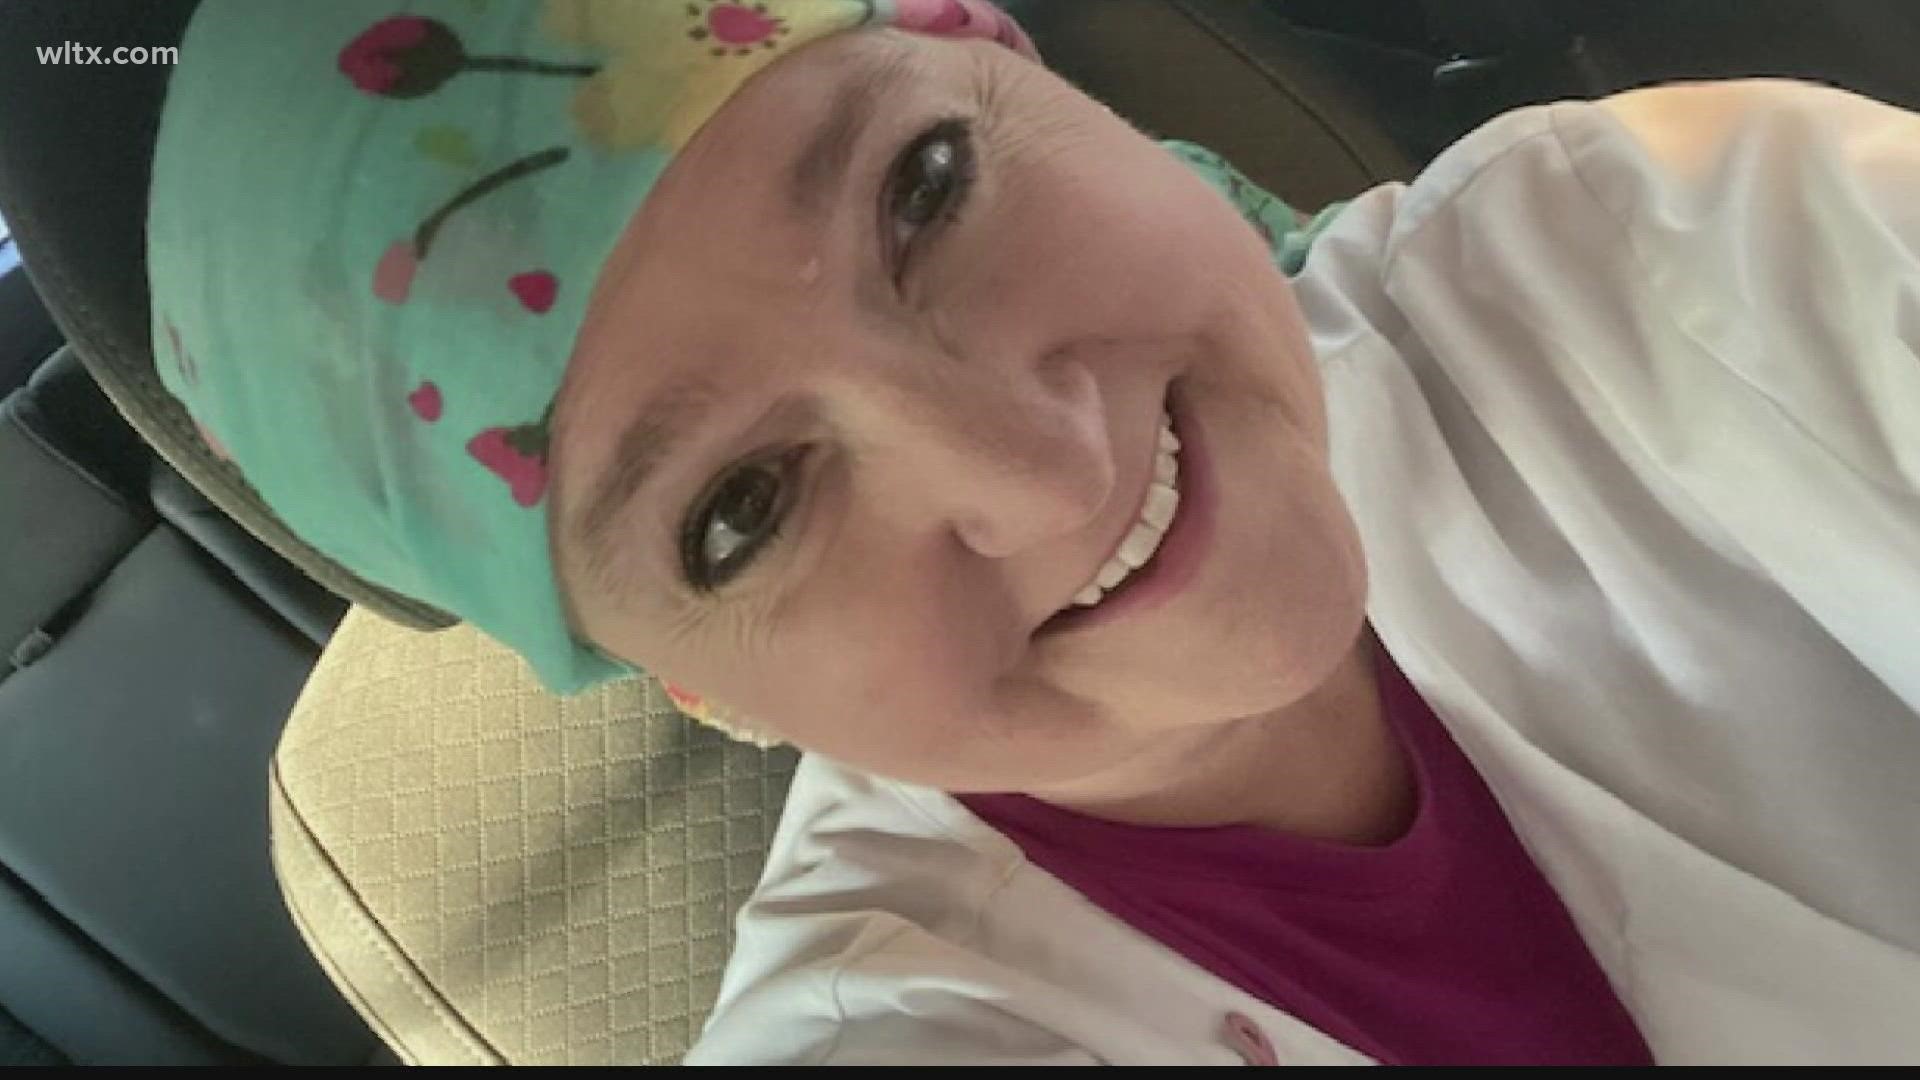 A breast cancer survivor says the transition from nurse to patient made her better at what she does